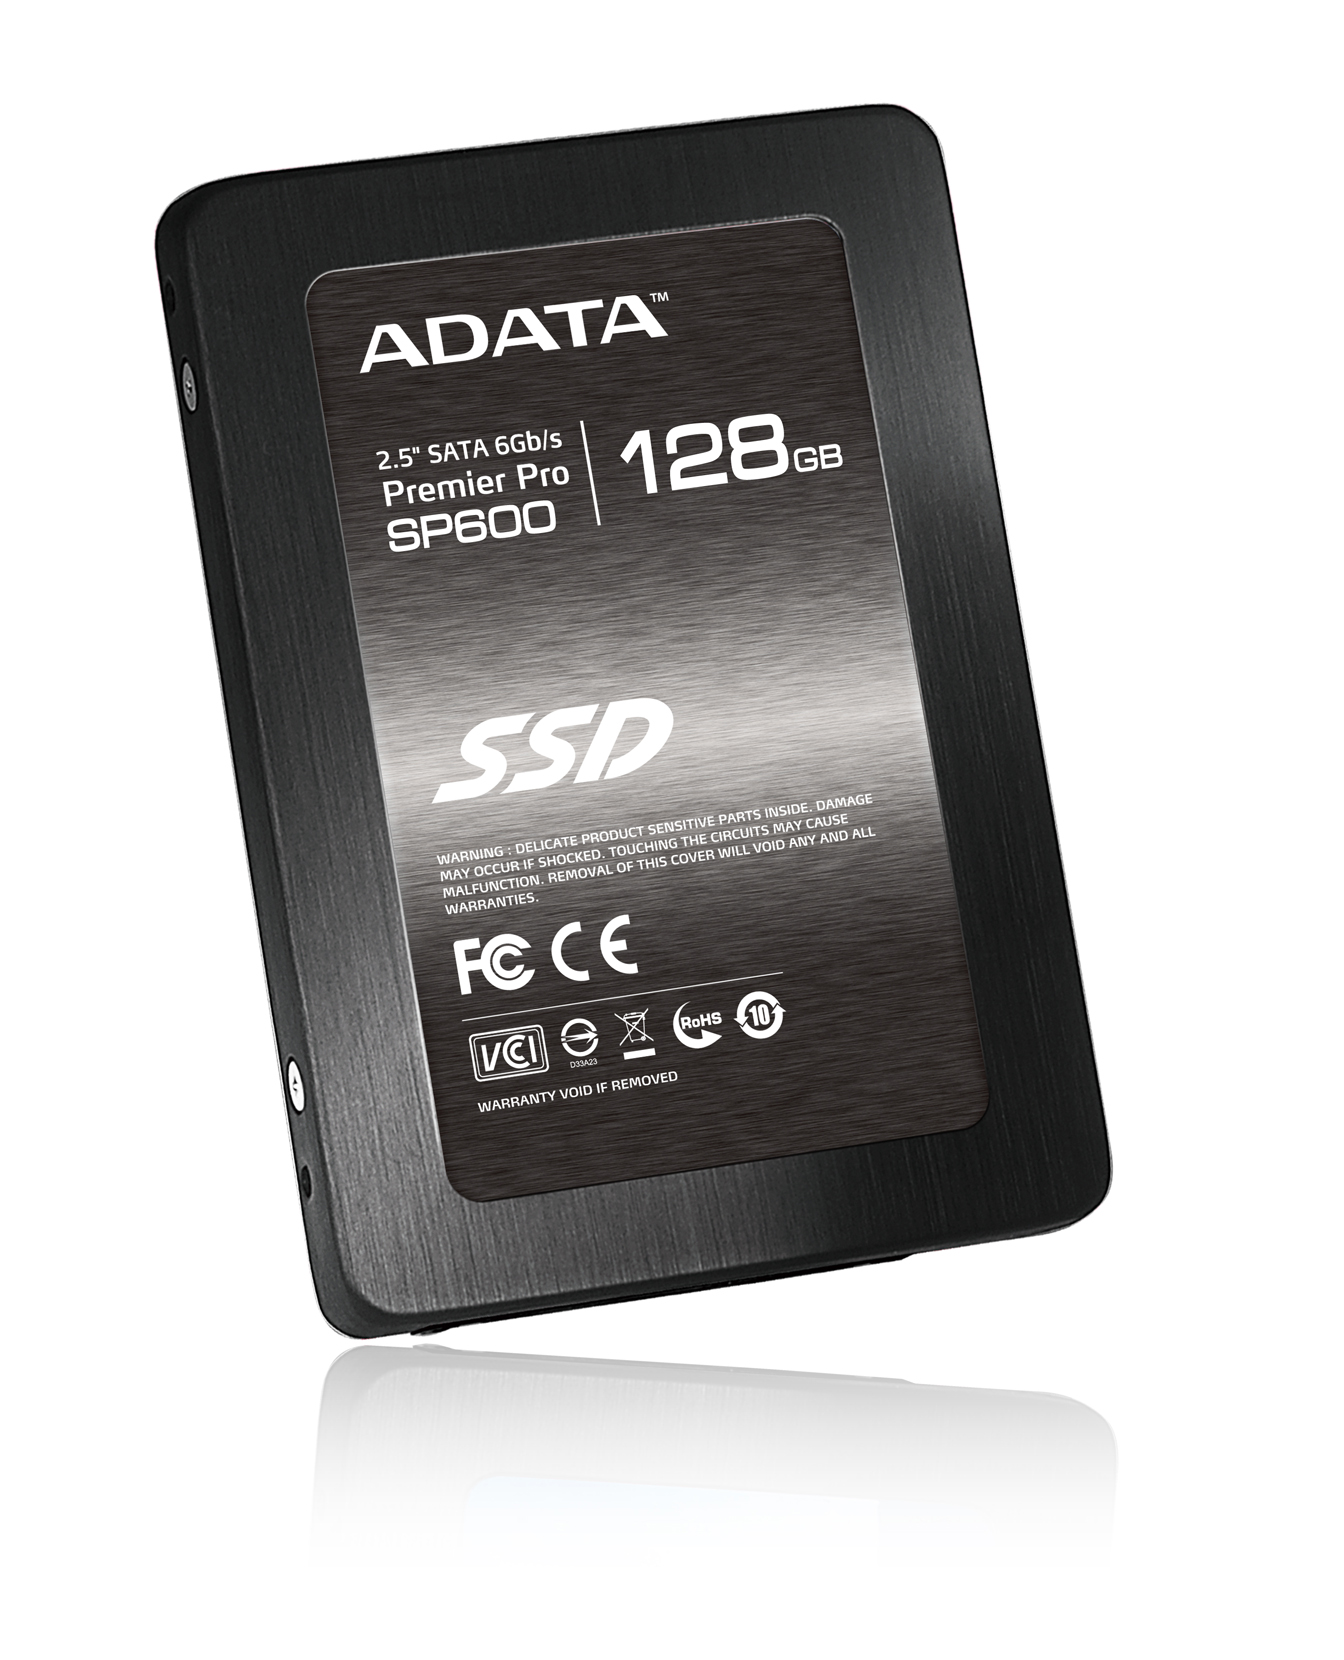 Media asset in full size related to 3dfxzone.it news item entitled as follows: ADATA annuncia la linea di Solid State Drive (SSD) SATA III SP600 | Image Name: news18261_SSD-ADATA-SP600_1.jpg